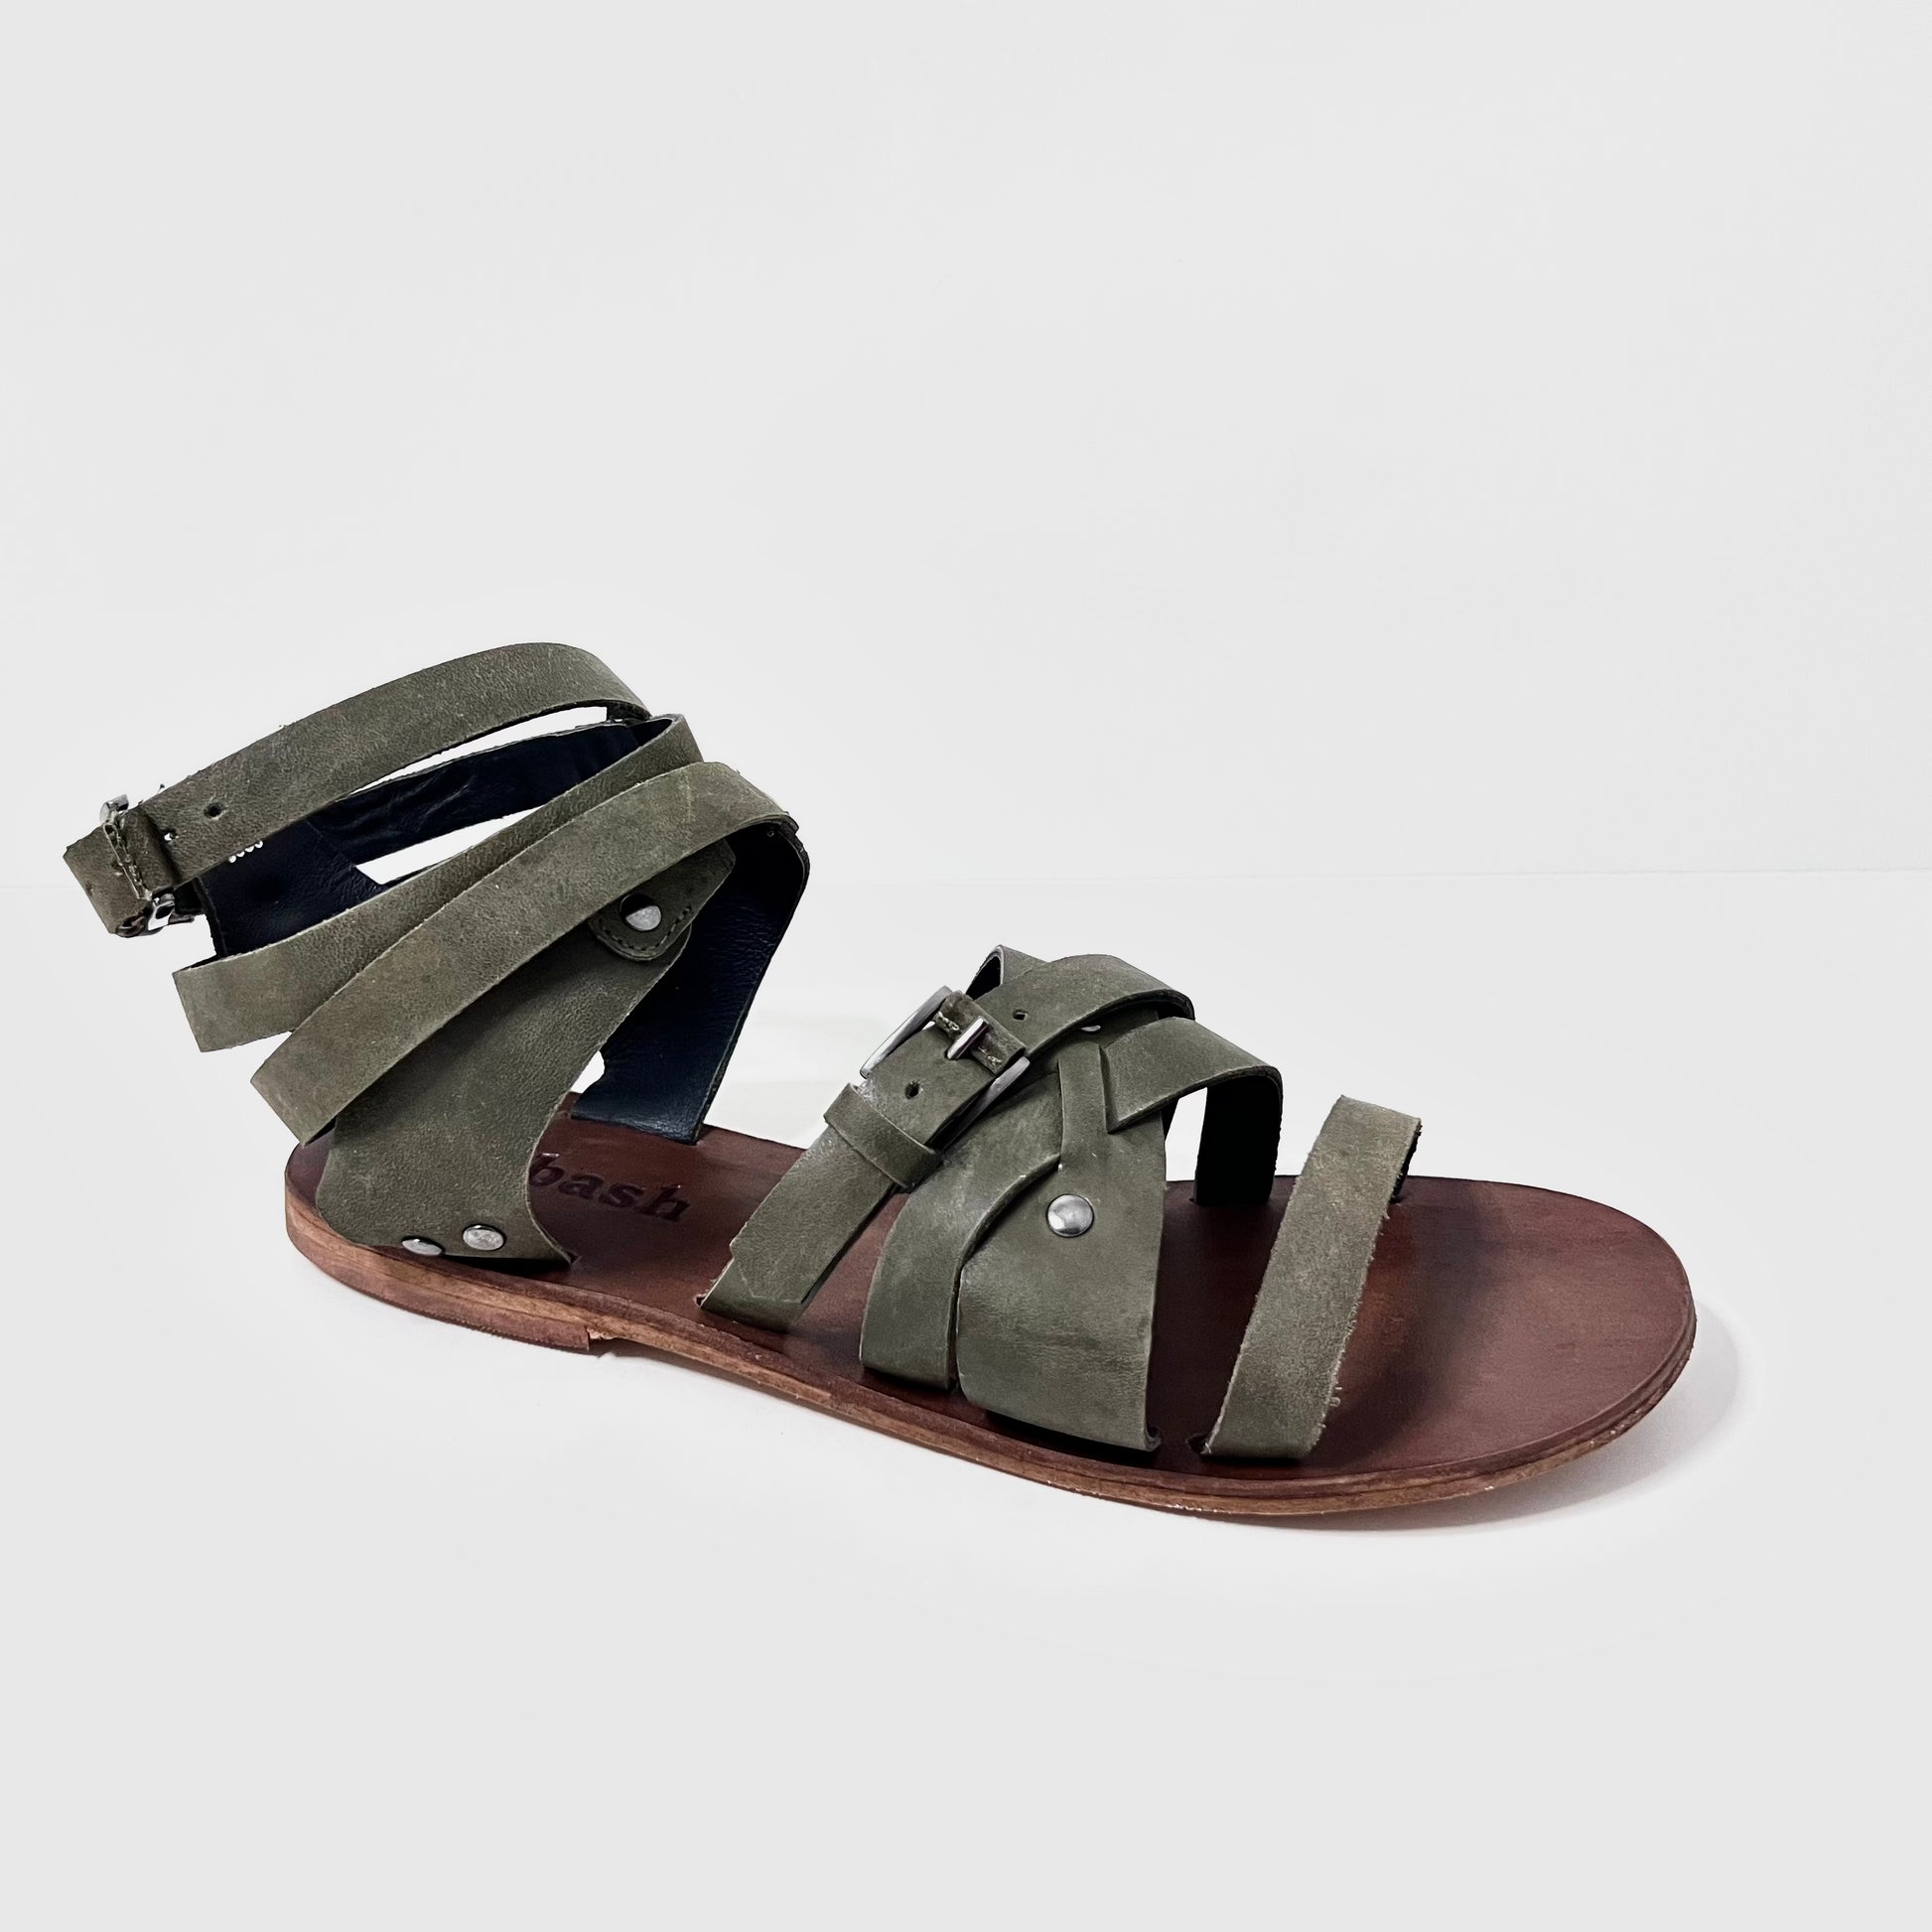 oobash Ariel gladitor leather sandal in green color for ladies girl women